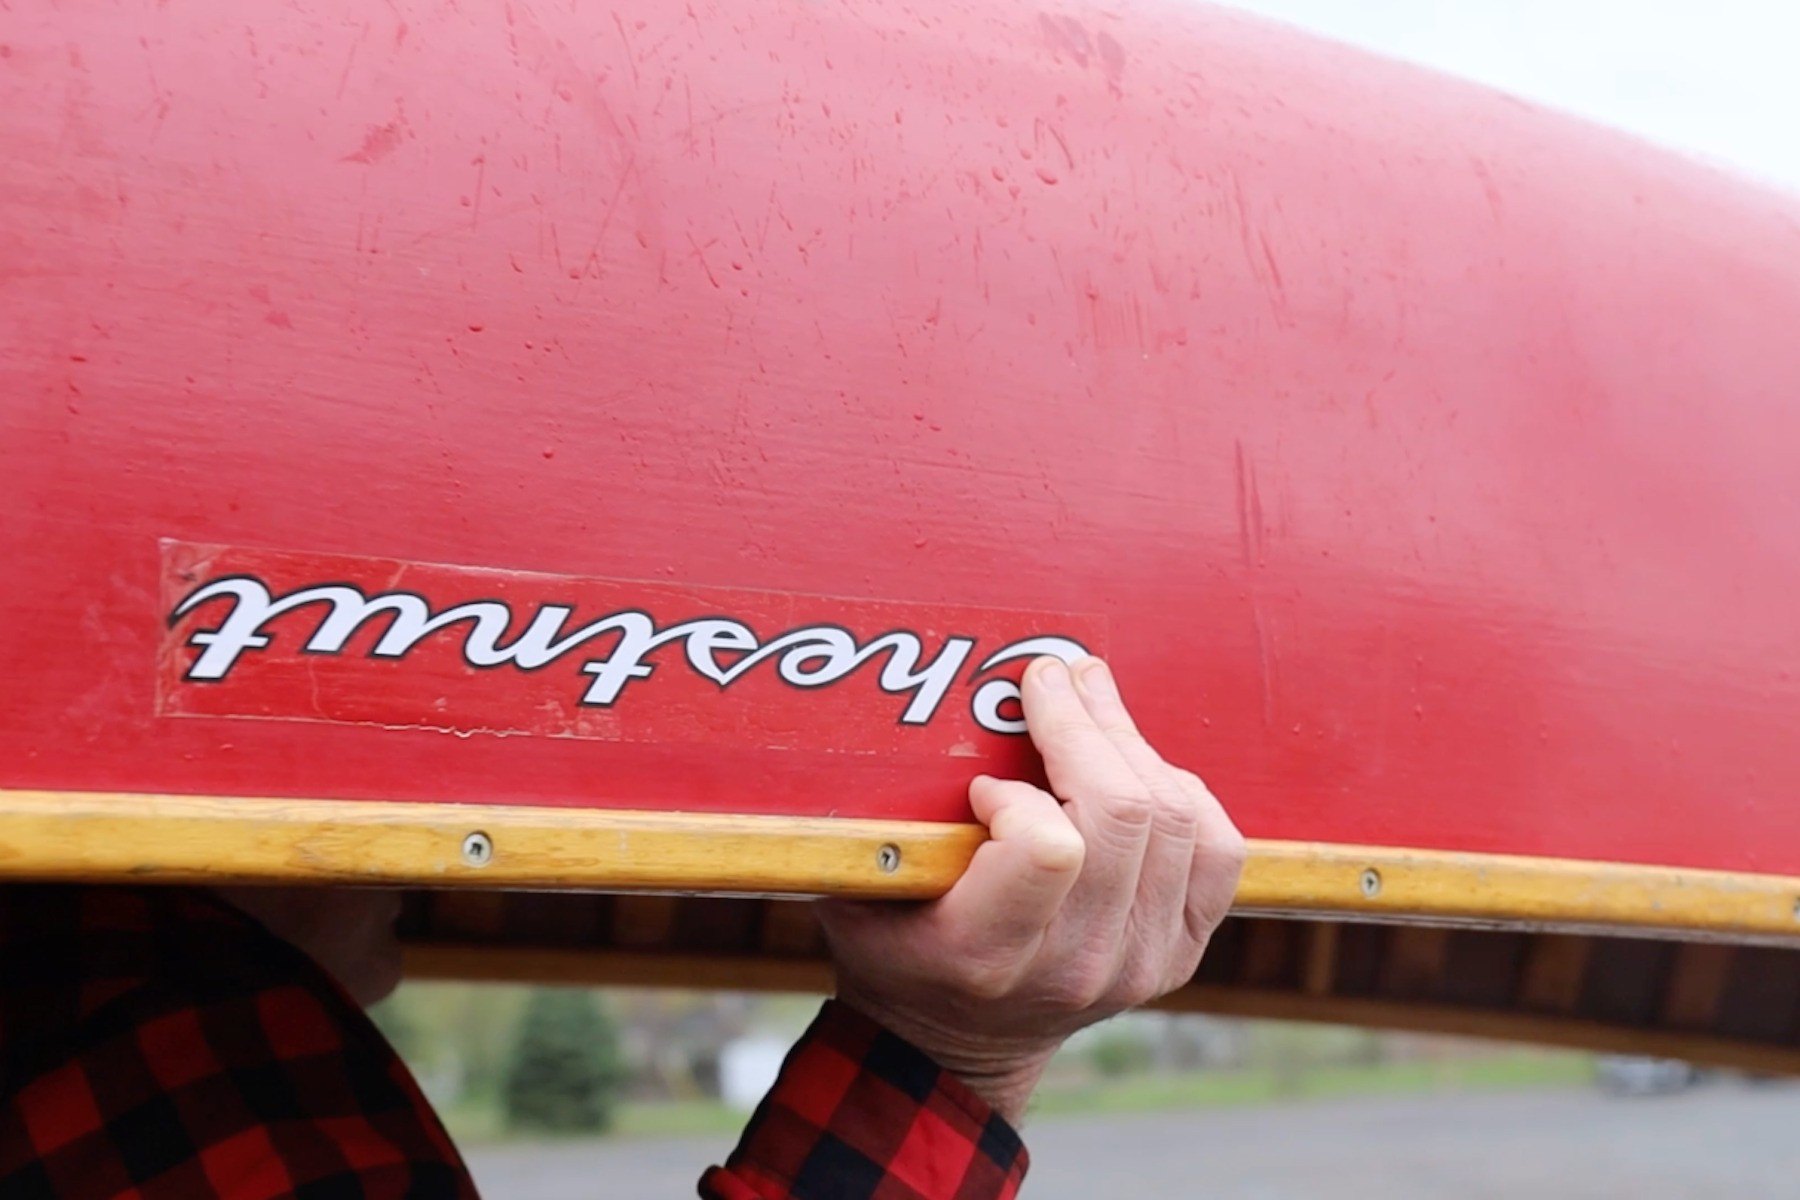 A man in red plaid grips the gunwales of a red Chestnut canoe while portaging it.